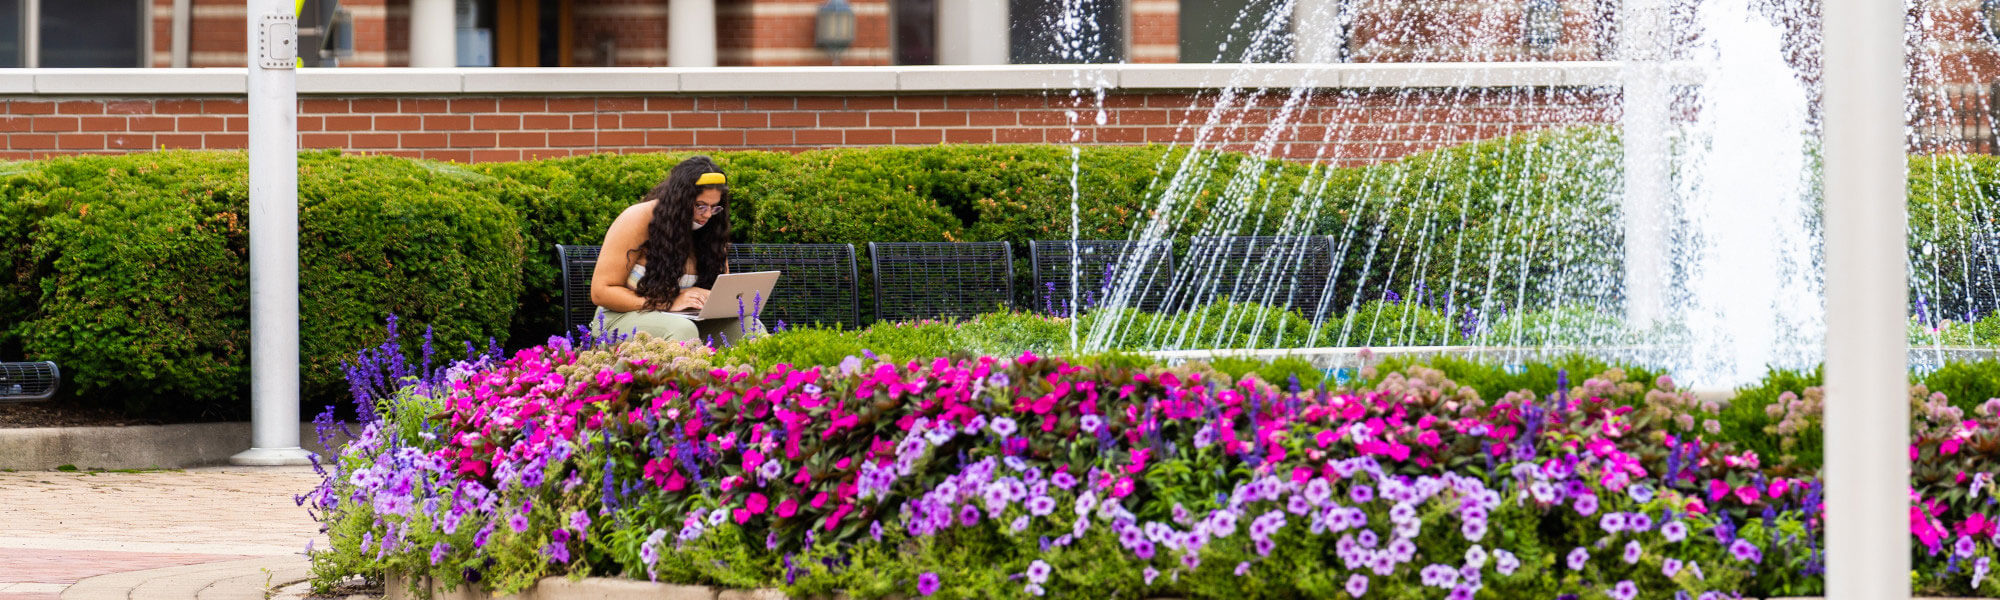 Student studying outdoors.